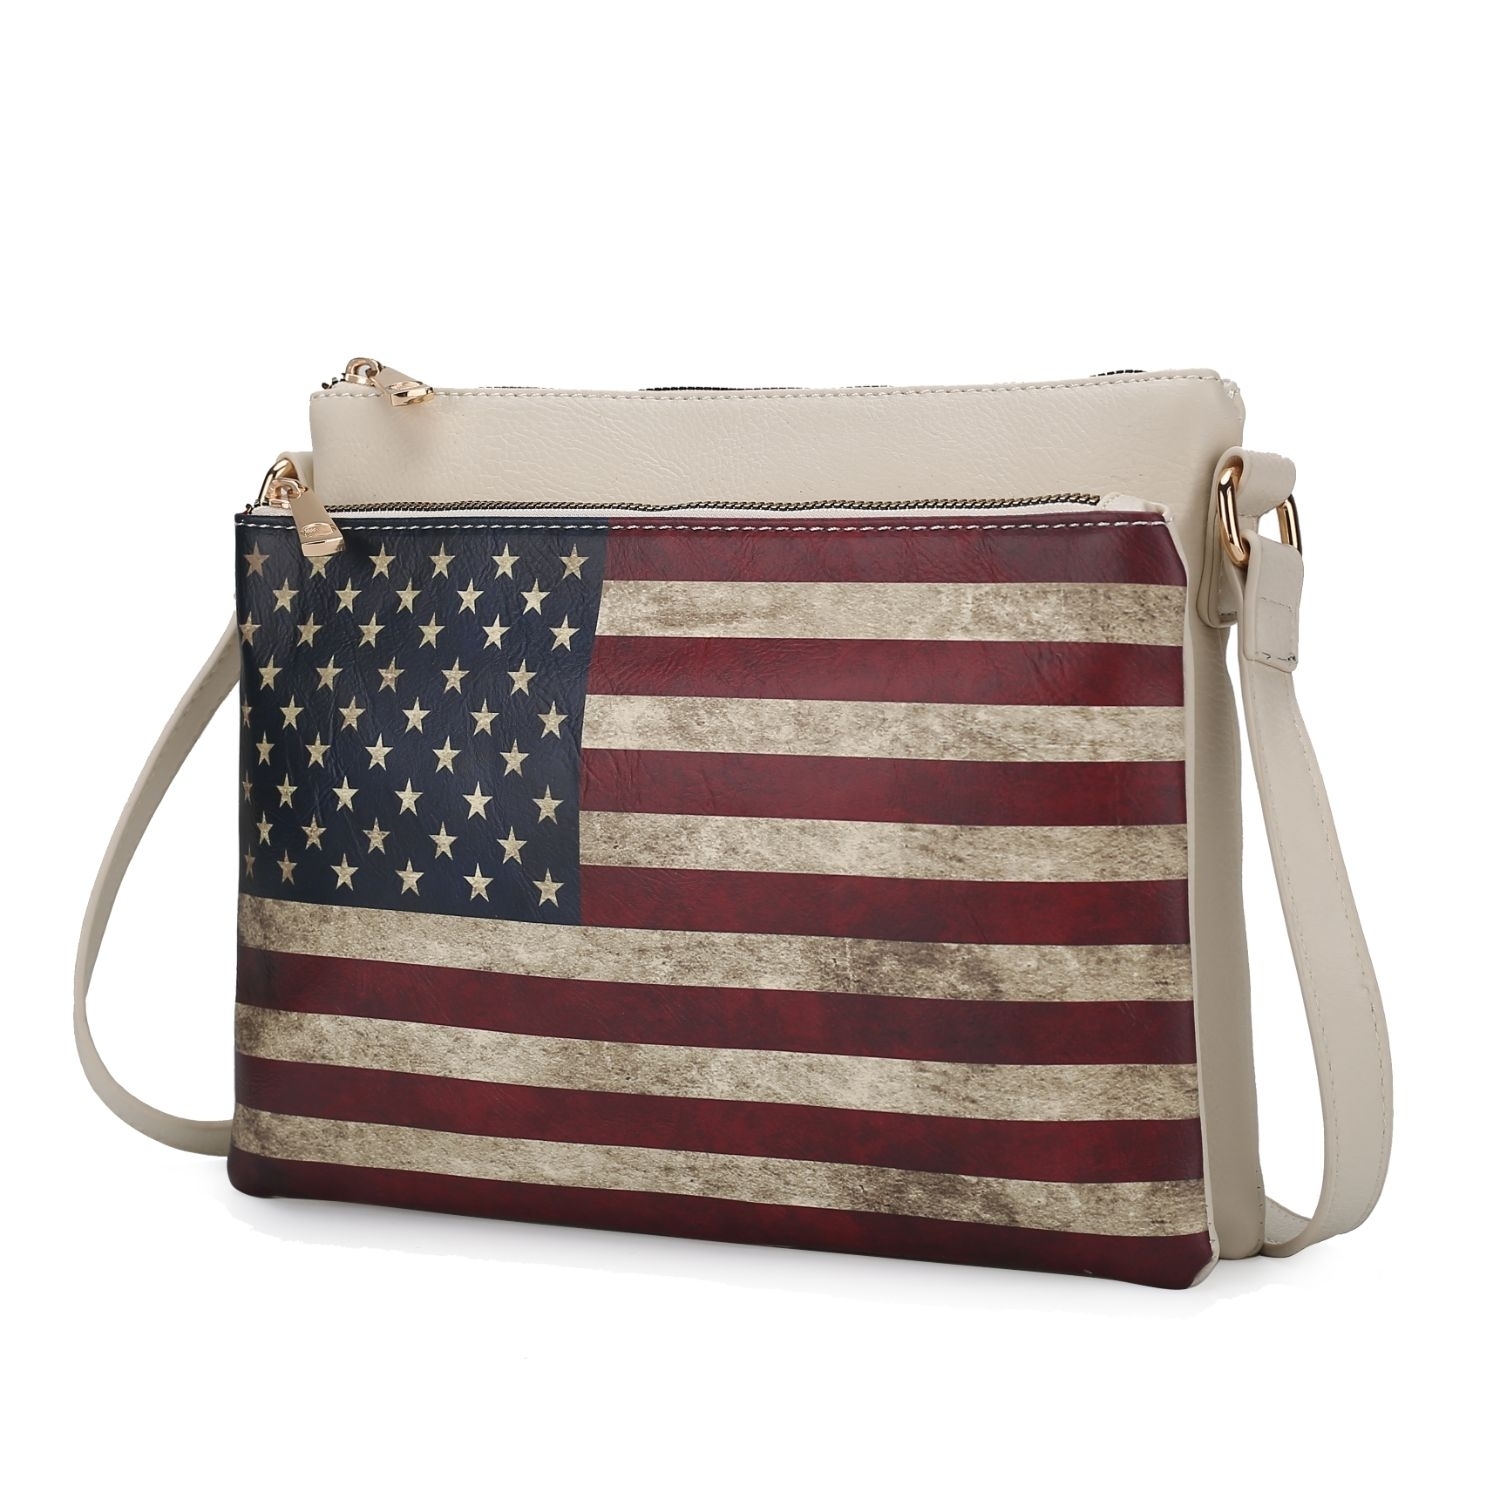 MKF Collection Madeline Printed Flag Vegan Leather Women's Crossbody Bag By Mia K - Rose Pink